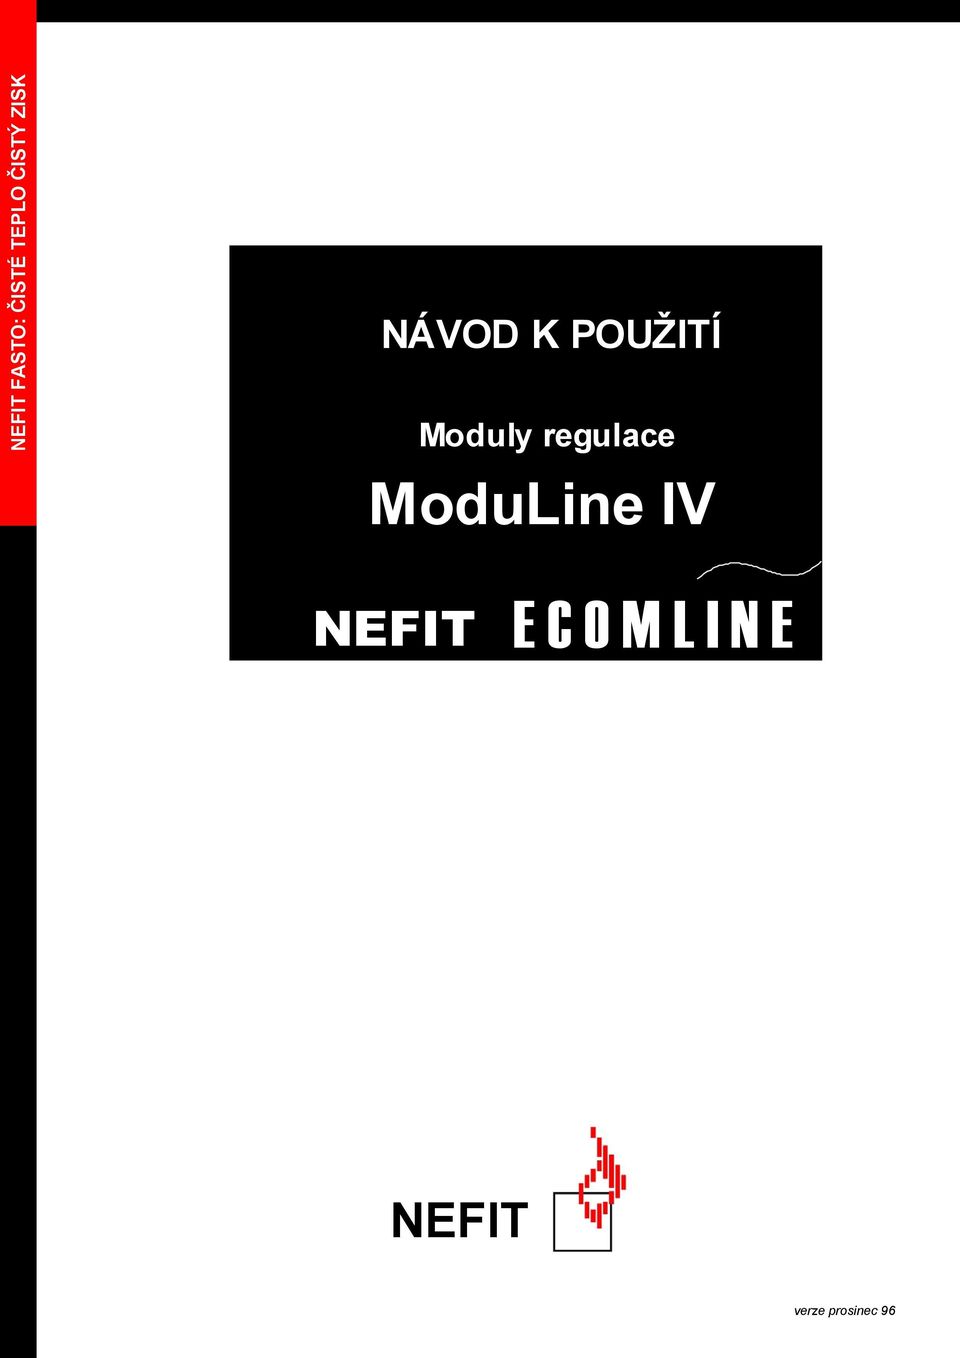 Moduly regulace ModuLine